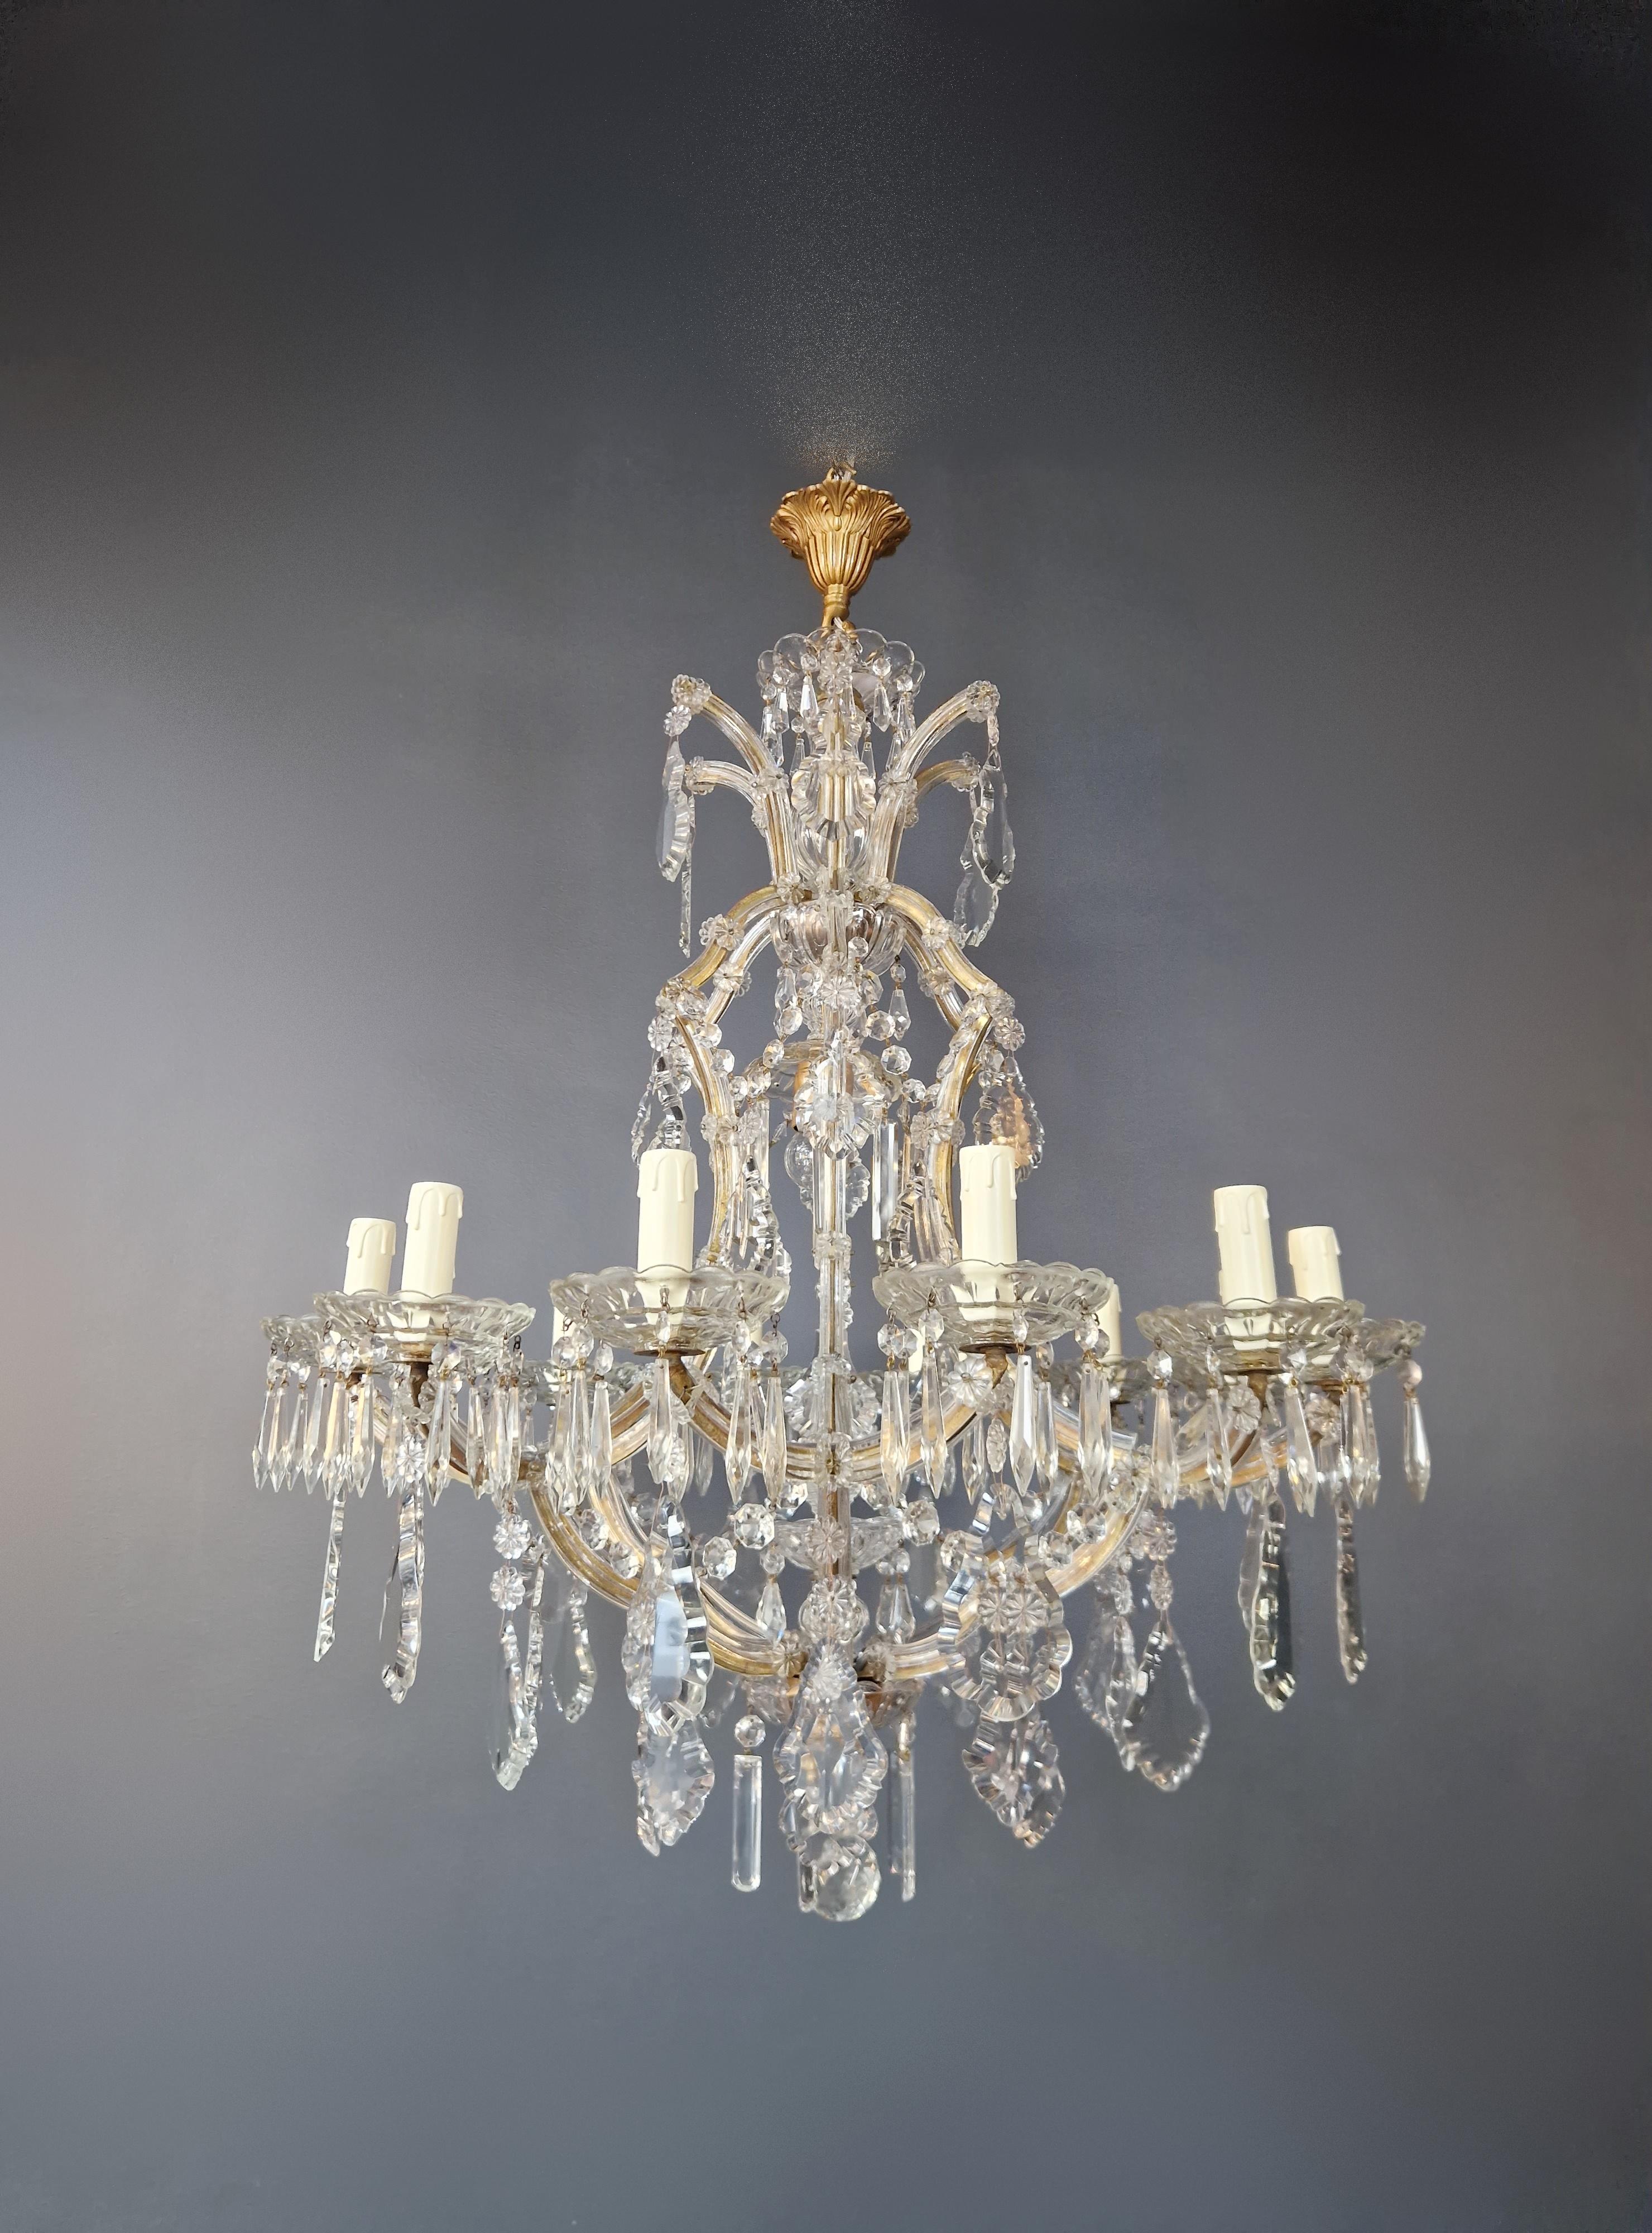 European Maria Theresa Crystal Chandelier Antique Classic Clear Glass For Sale